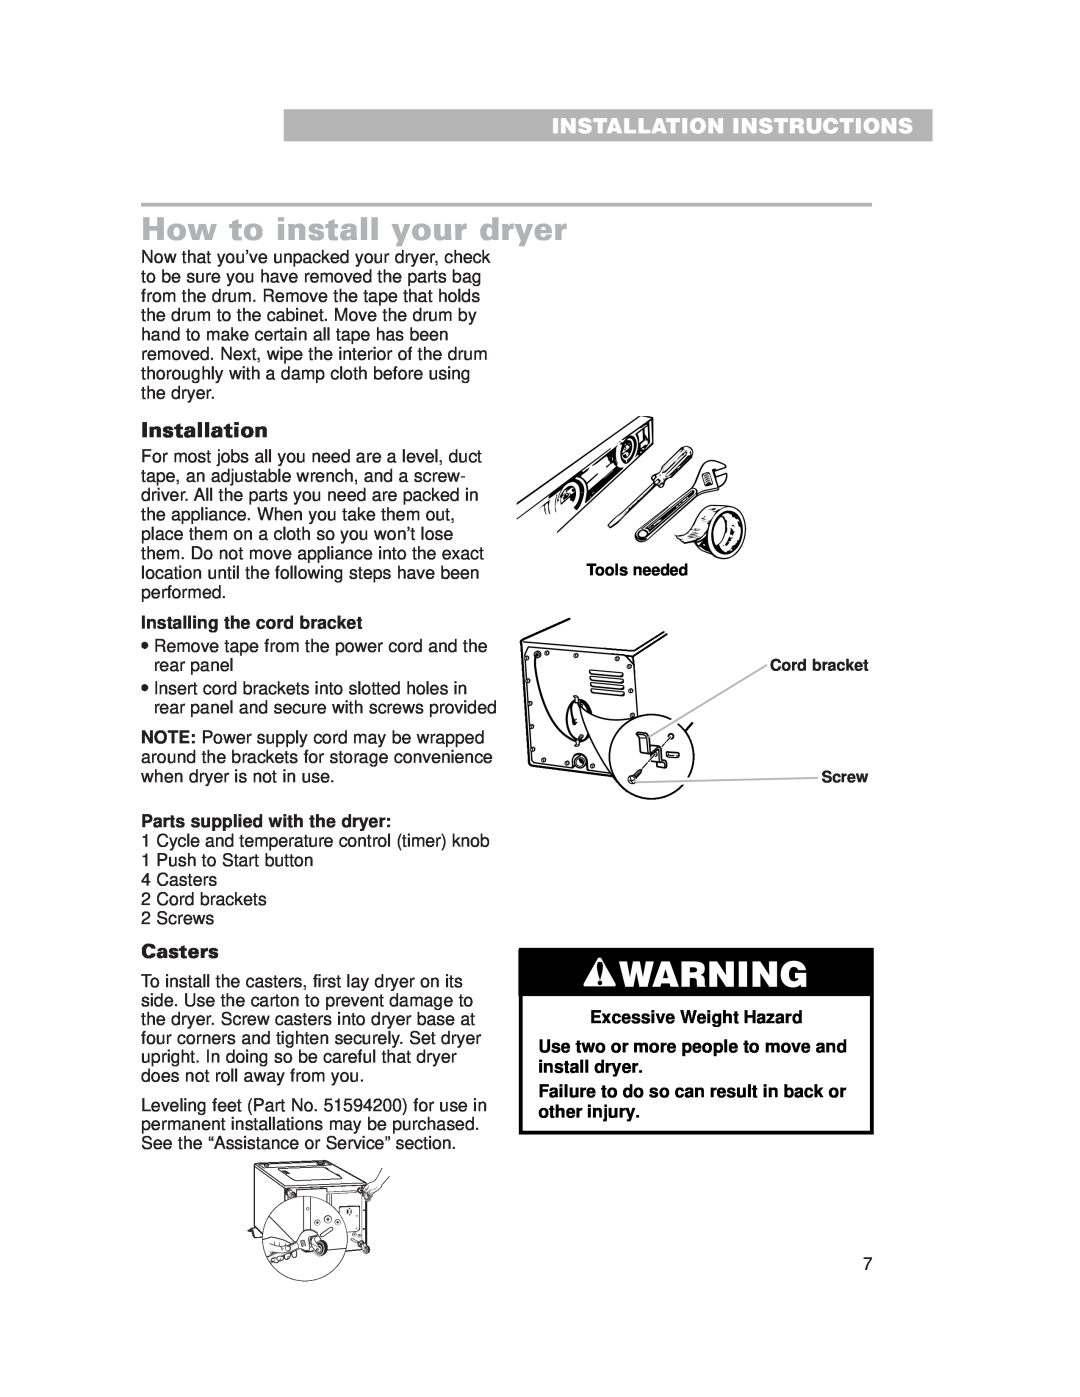 Whirlpool 3977631 How to install your dryer, Installation Instructions, Casters, Installing the cord bracket 